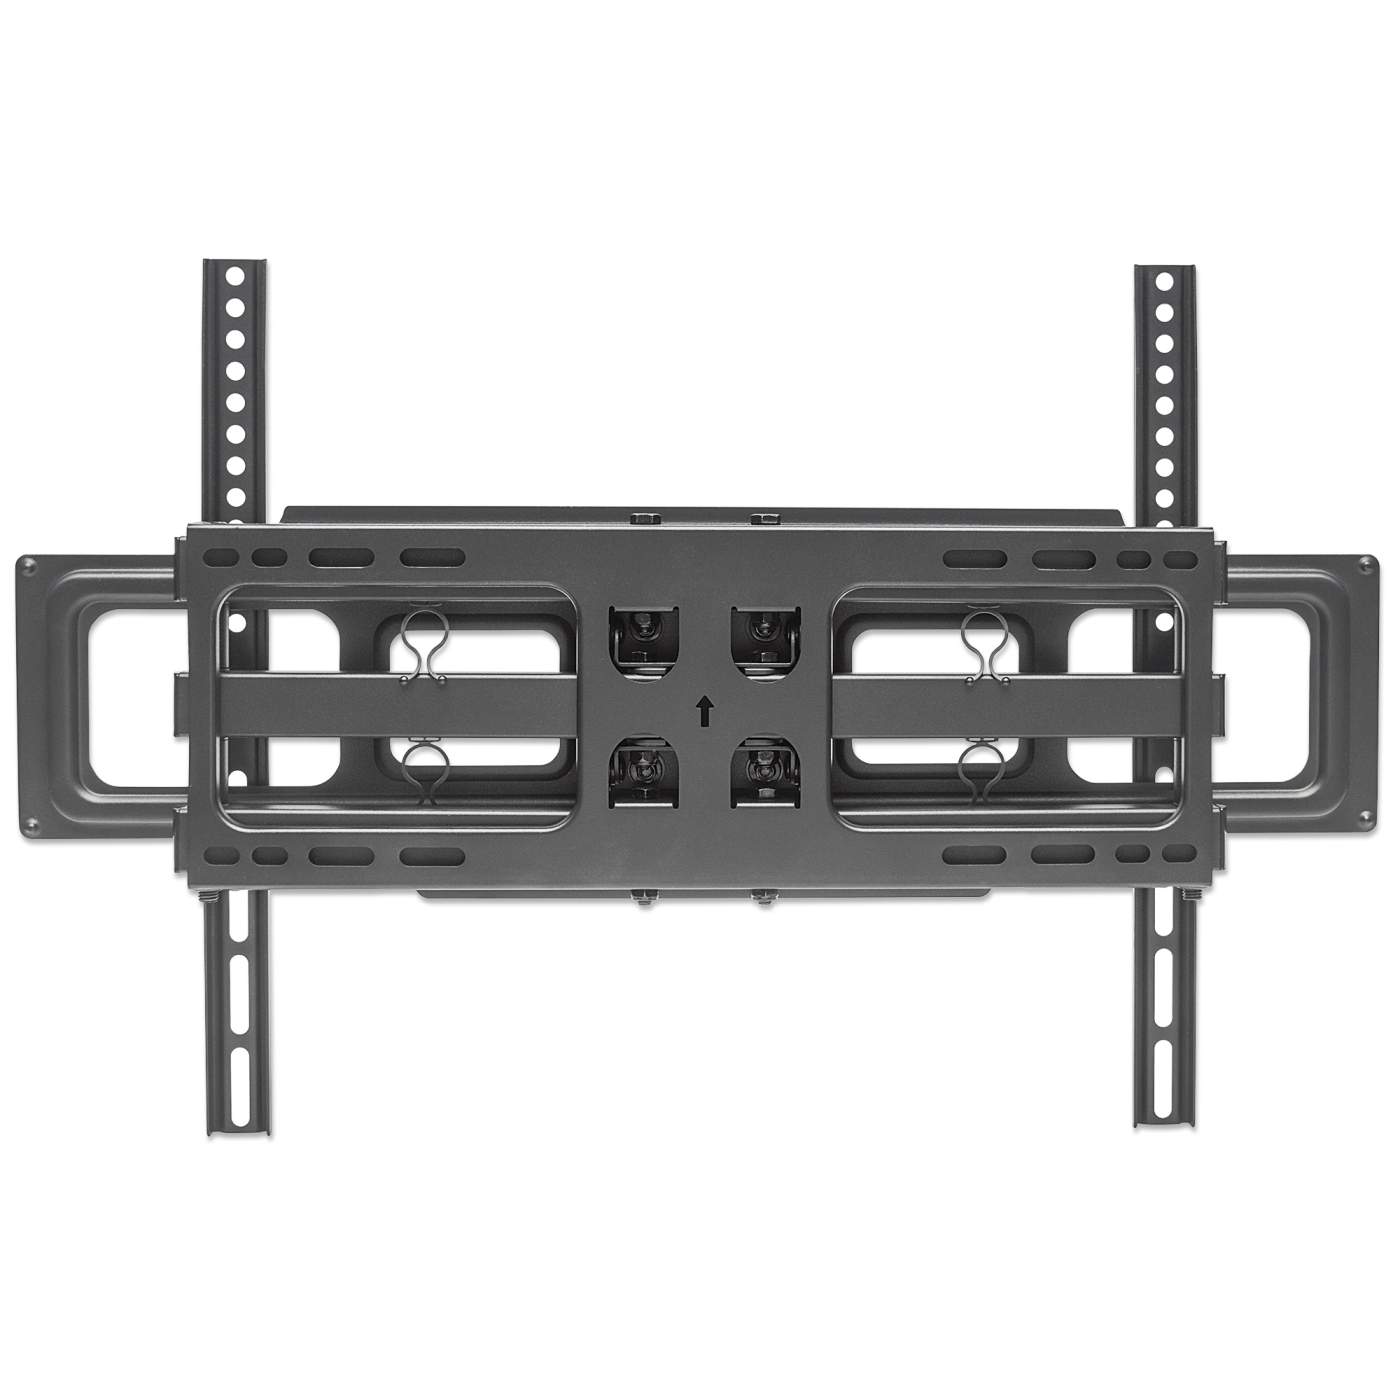 Full-Motion TV Wall Mount with Post-Leveling Adjustment Image 3